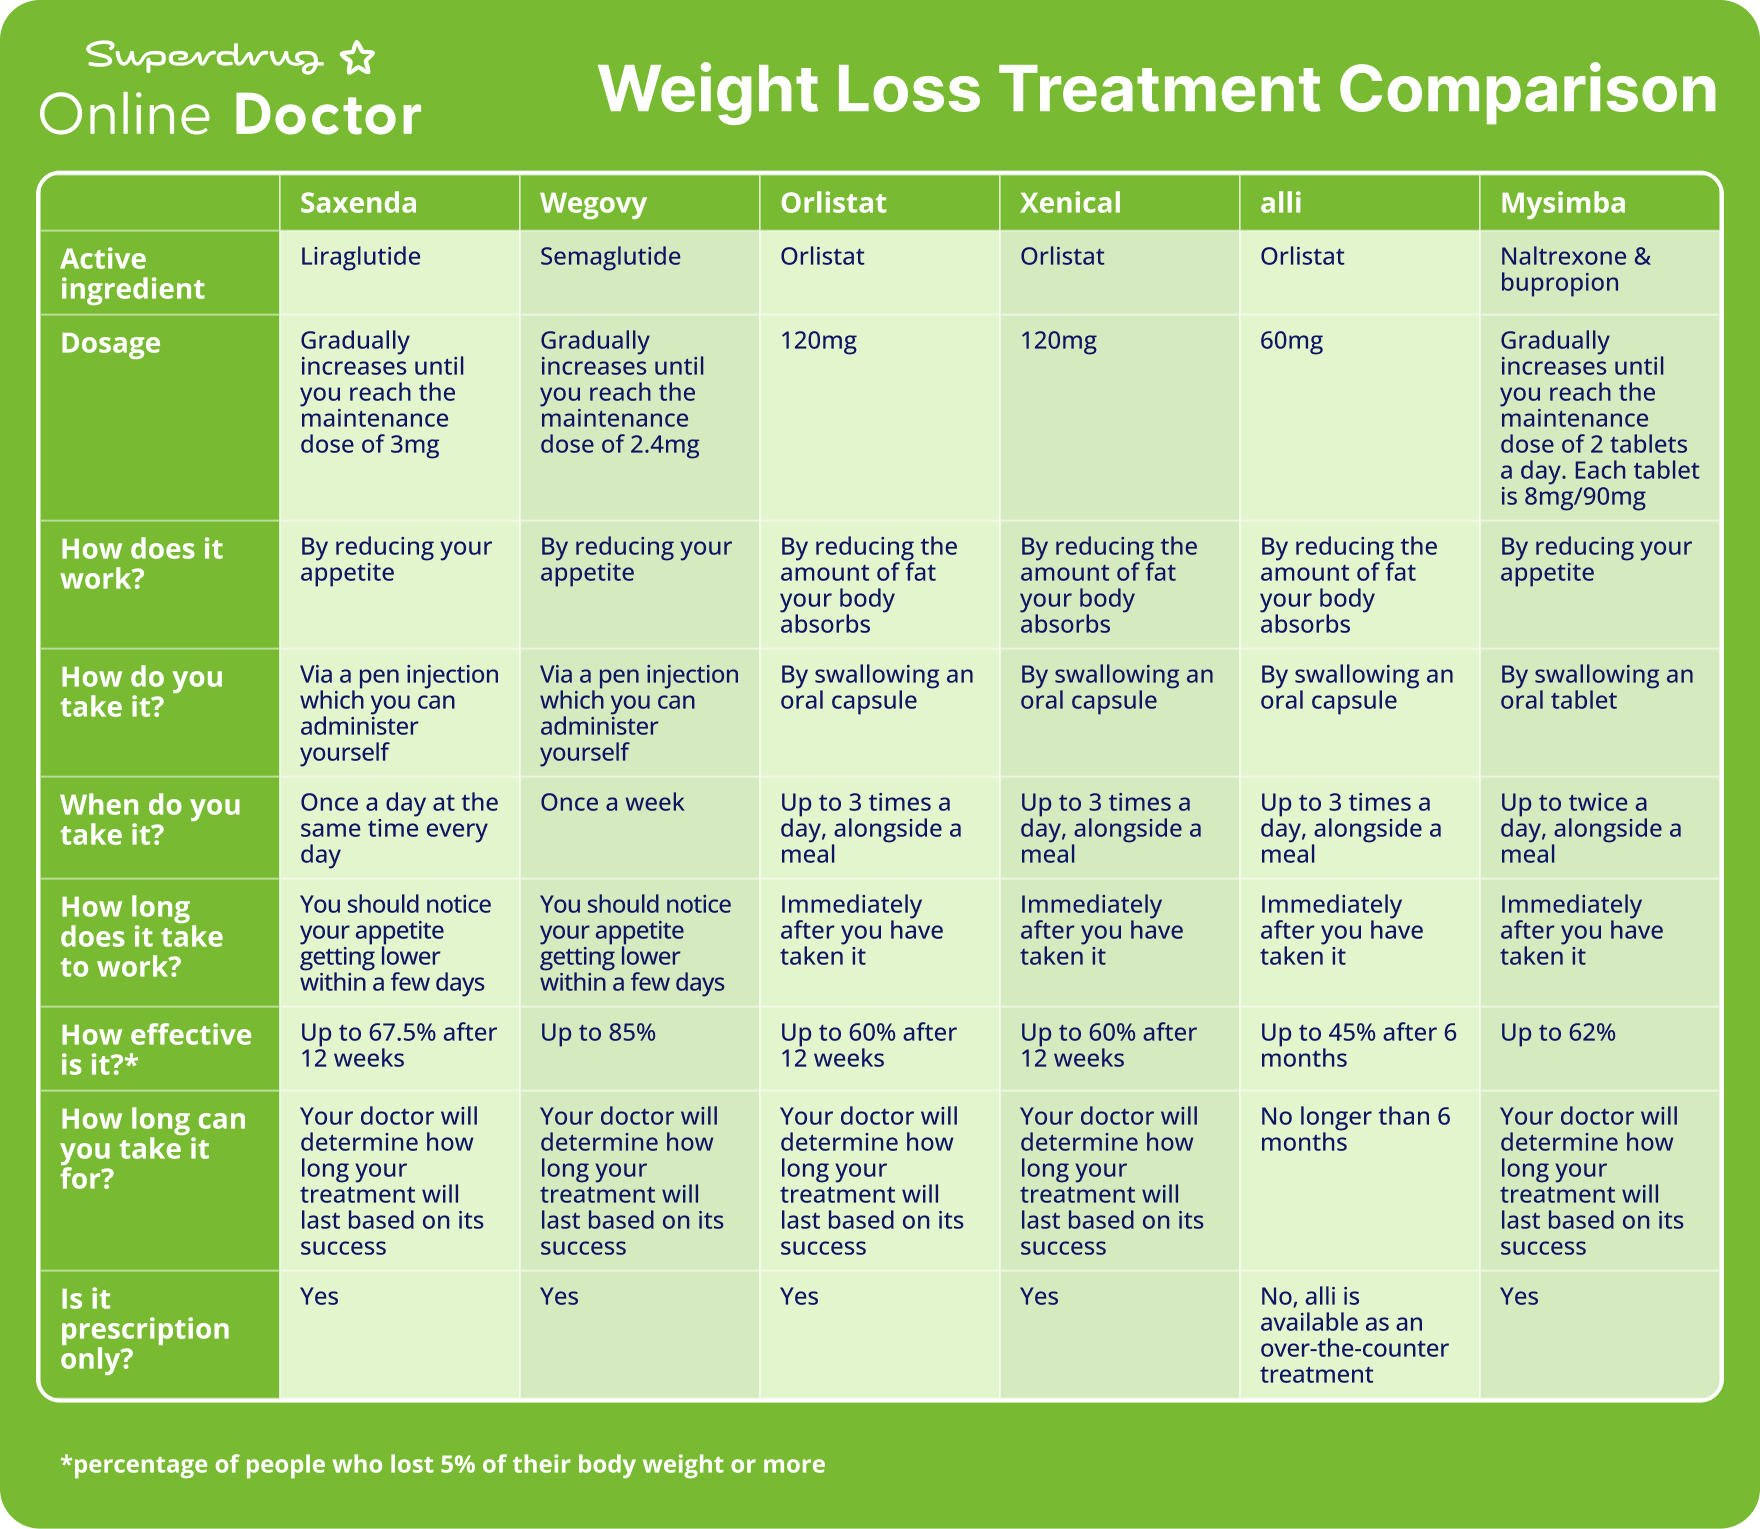 A table comparing various weight loss medications